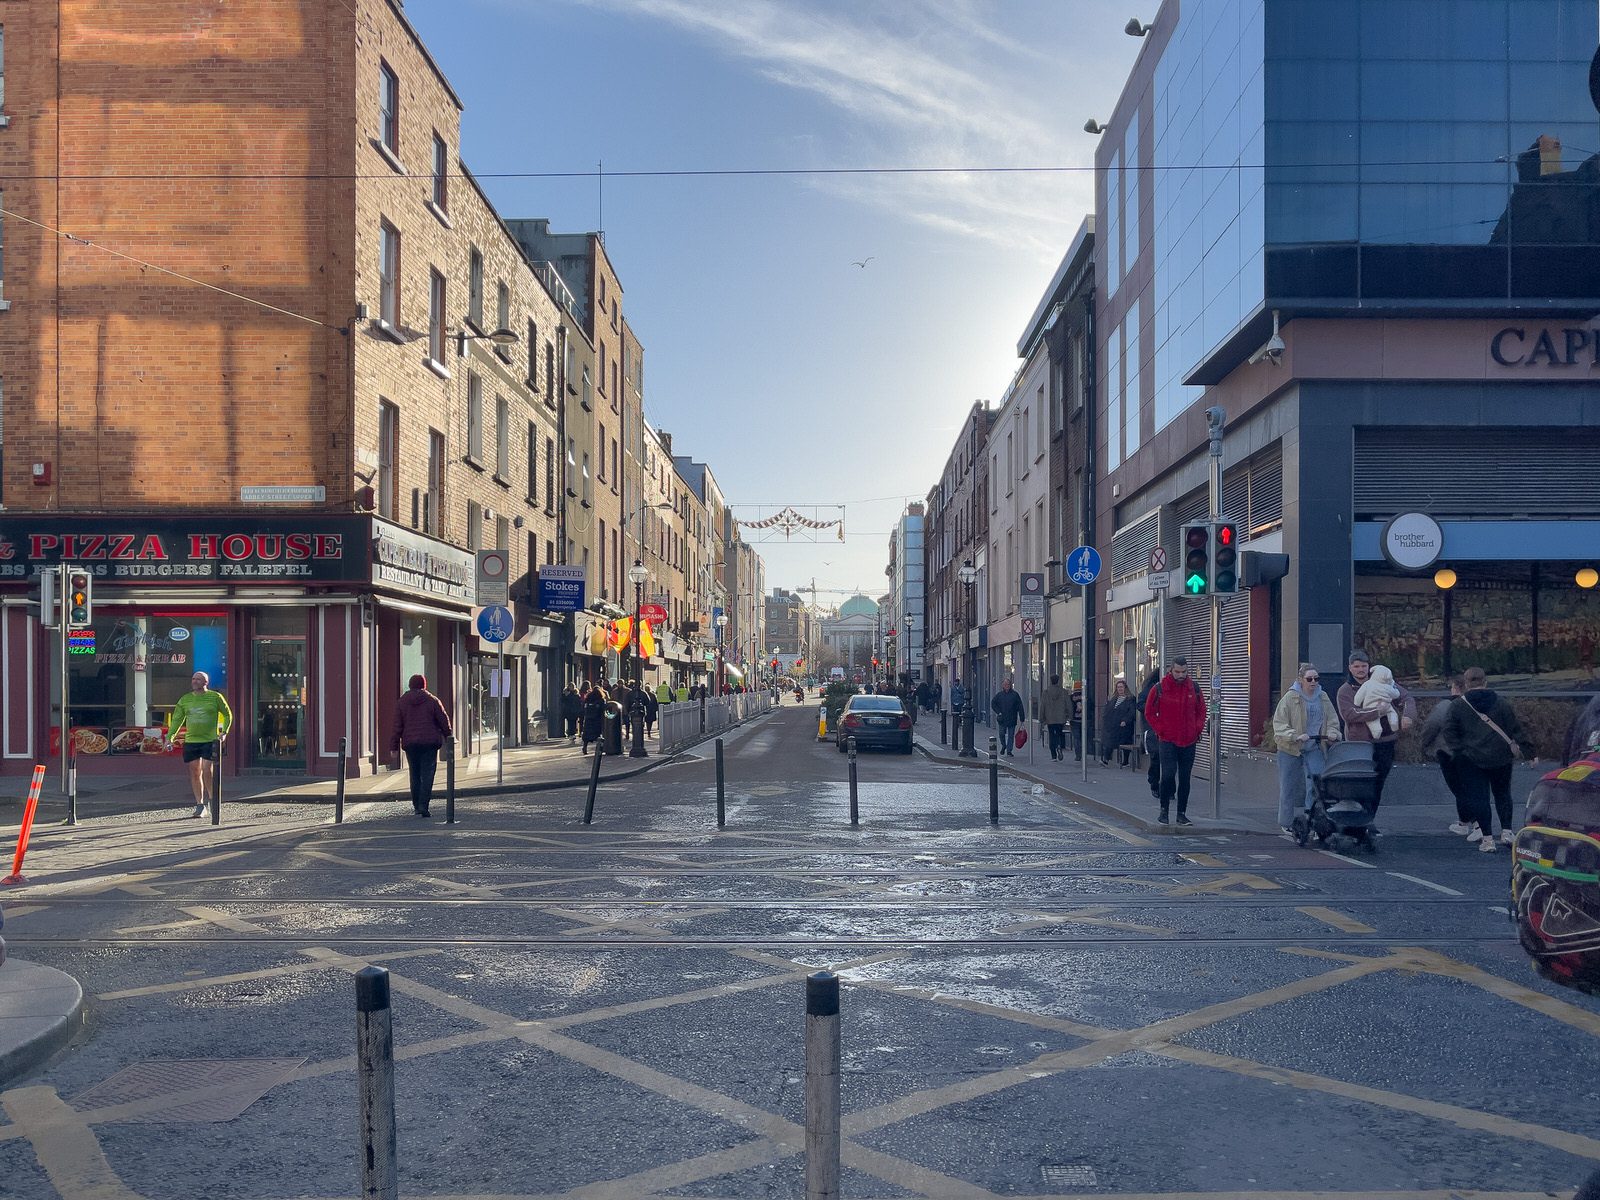 THE NEW STREET FURNITURE AND THE CHRISTMAS TREE [HAVE ARRIVED IN CAPEL STREET]-225867-1